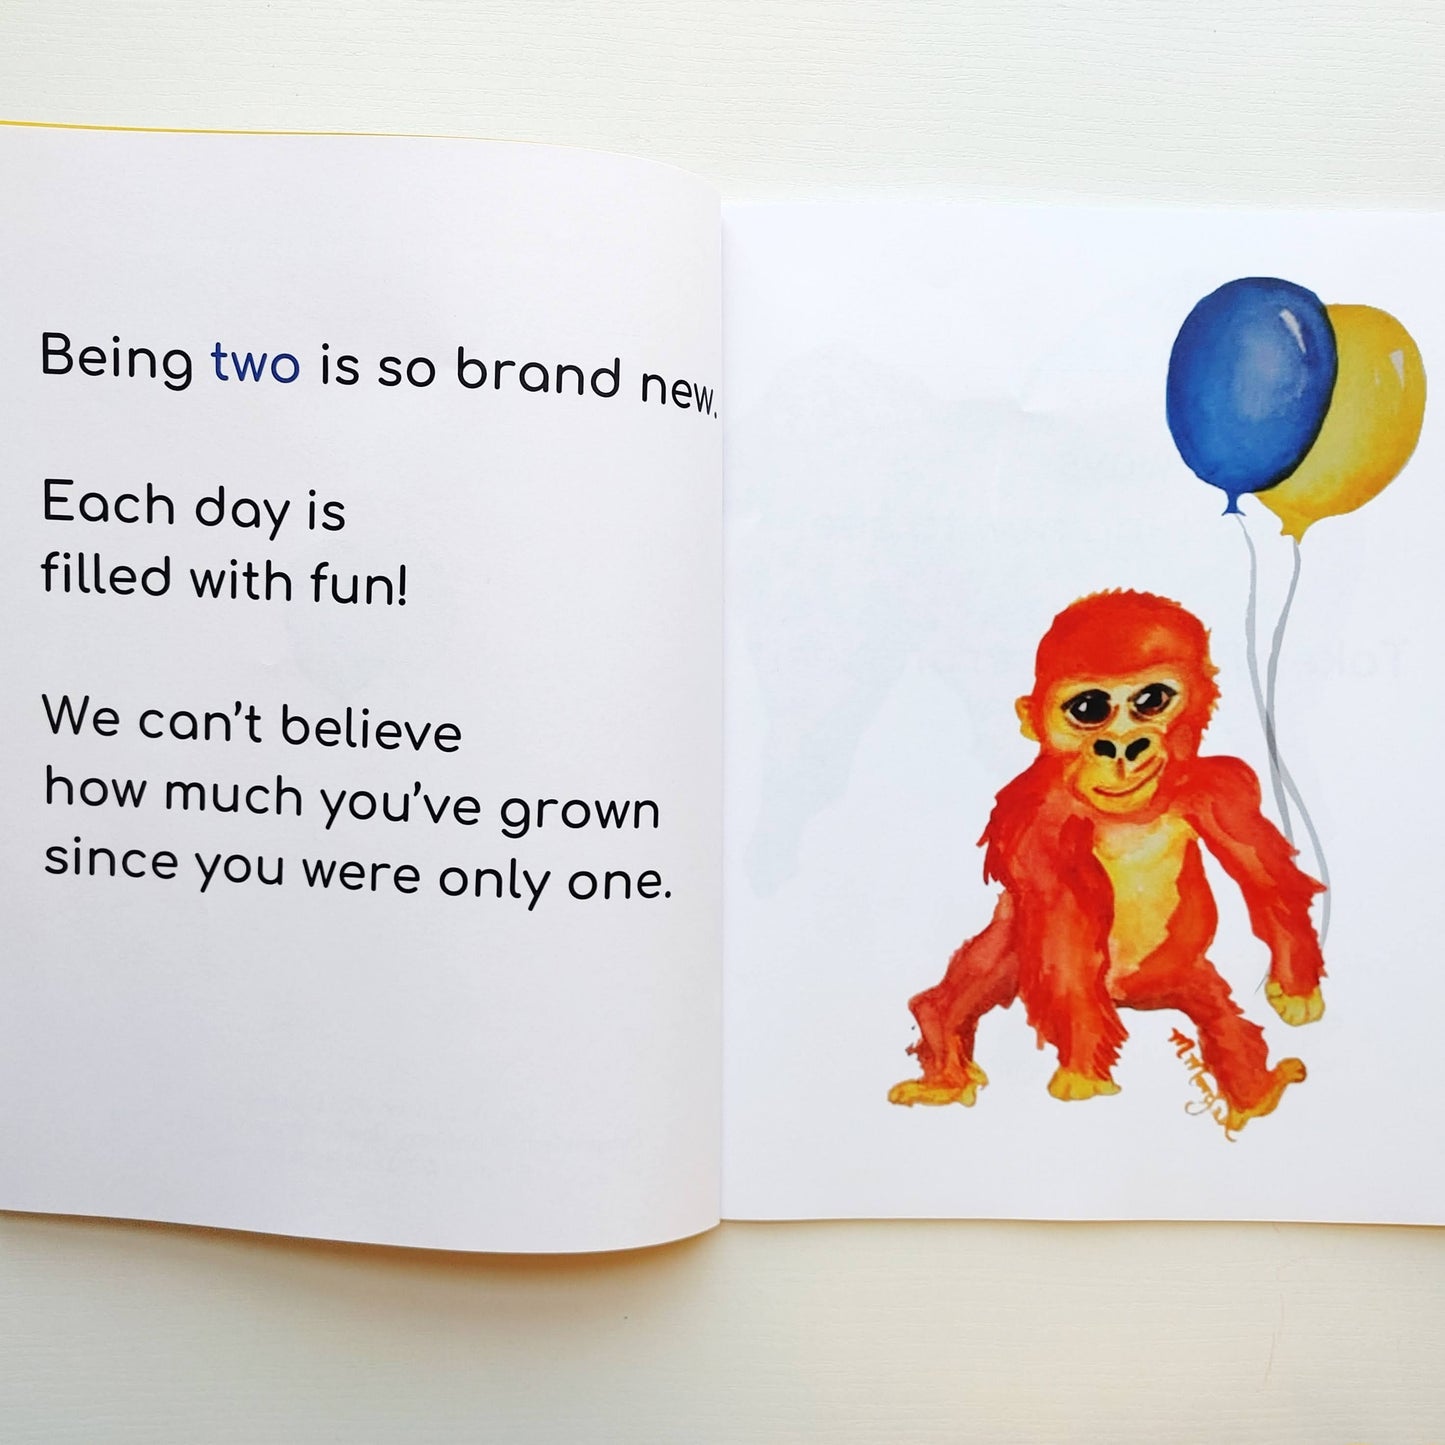 Two: A Birthday Book